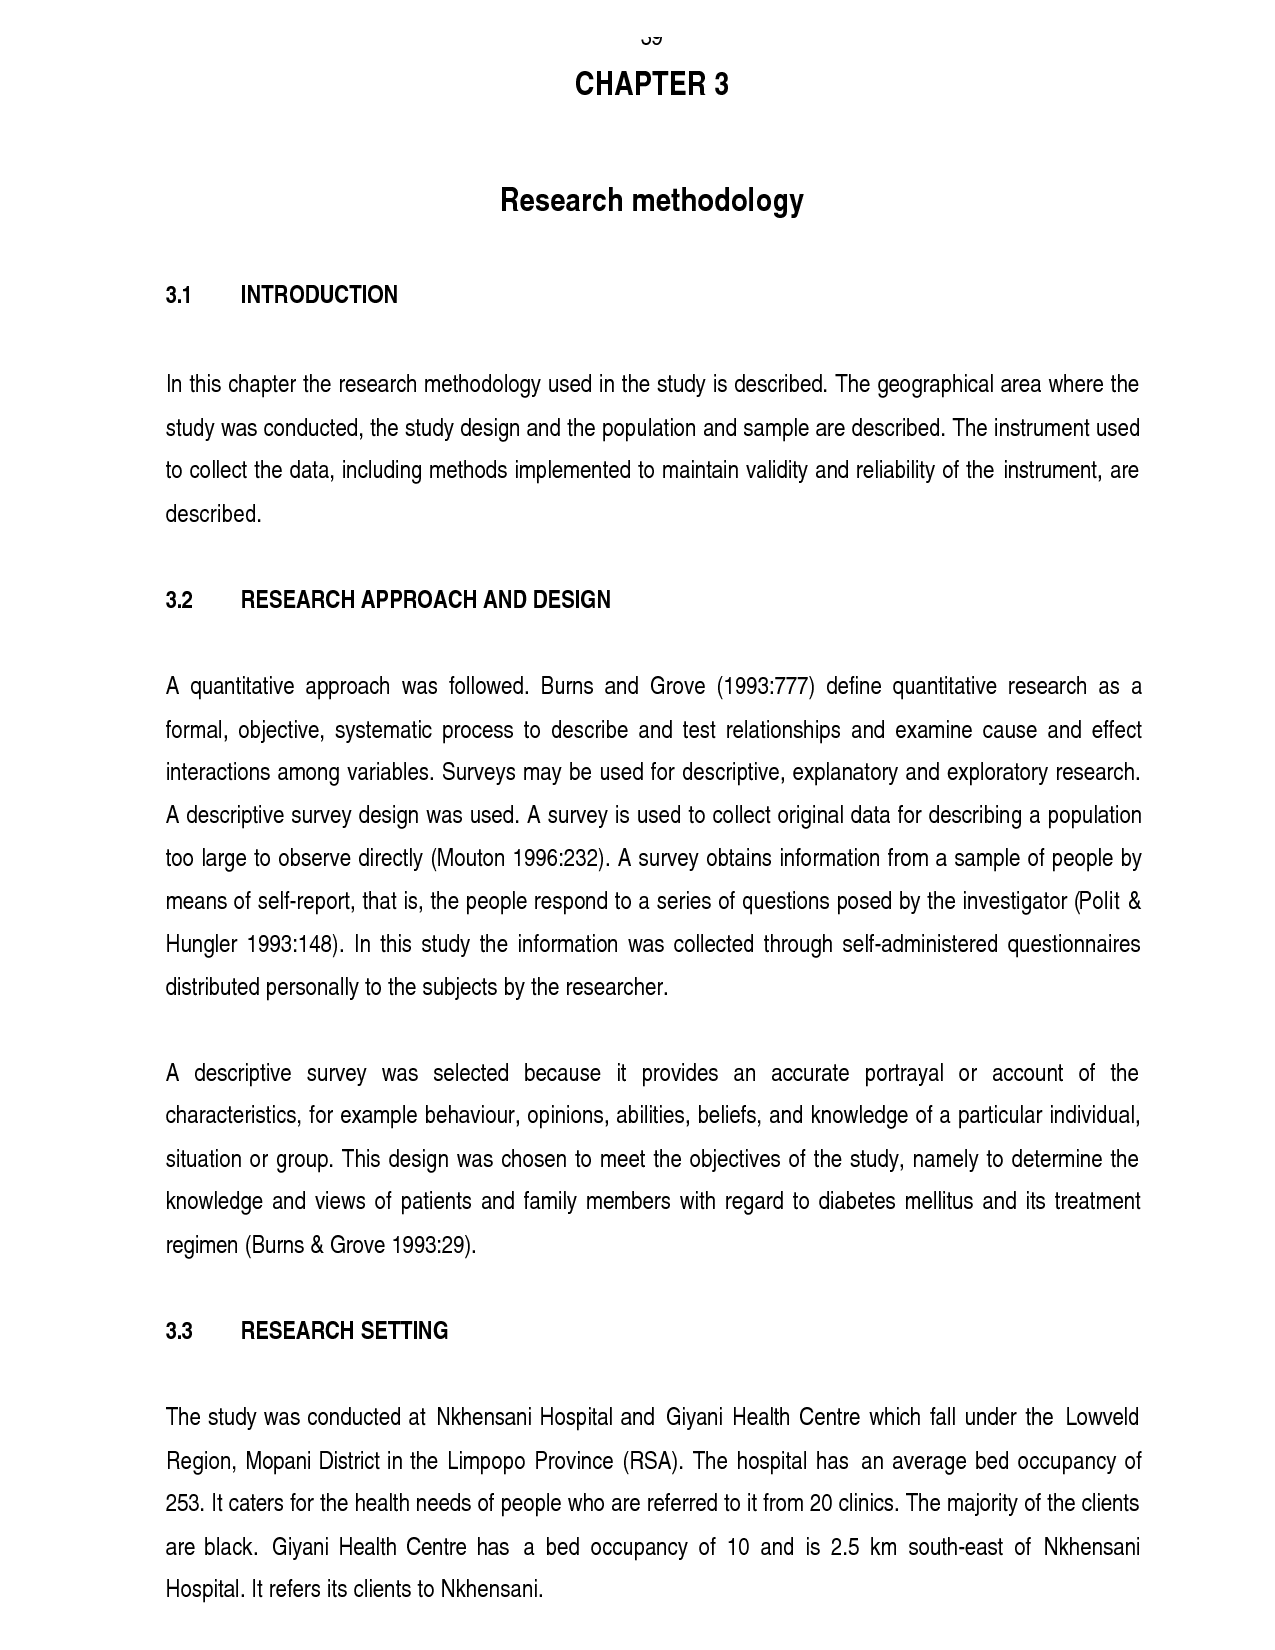 Dissertation research and methodology